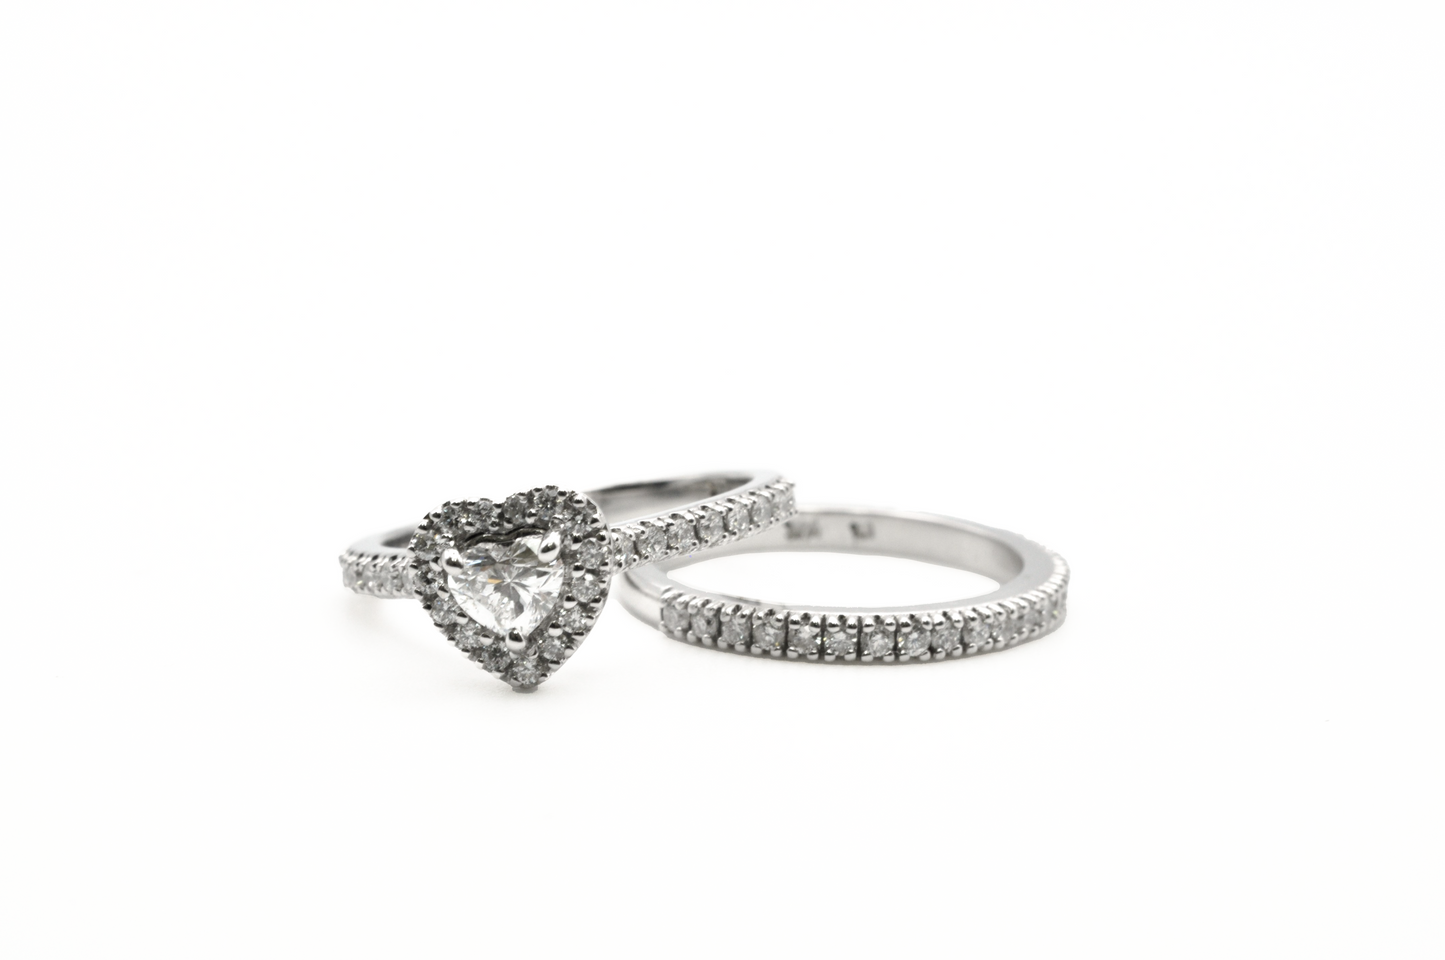 White Gold Heart Diamond with a Halo Engagement Ring and a Pave Diamond Wedding Band